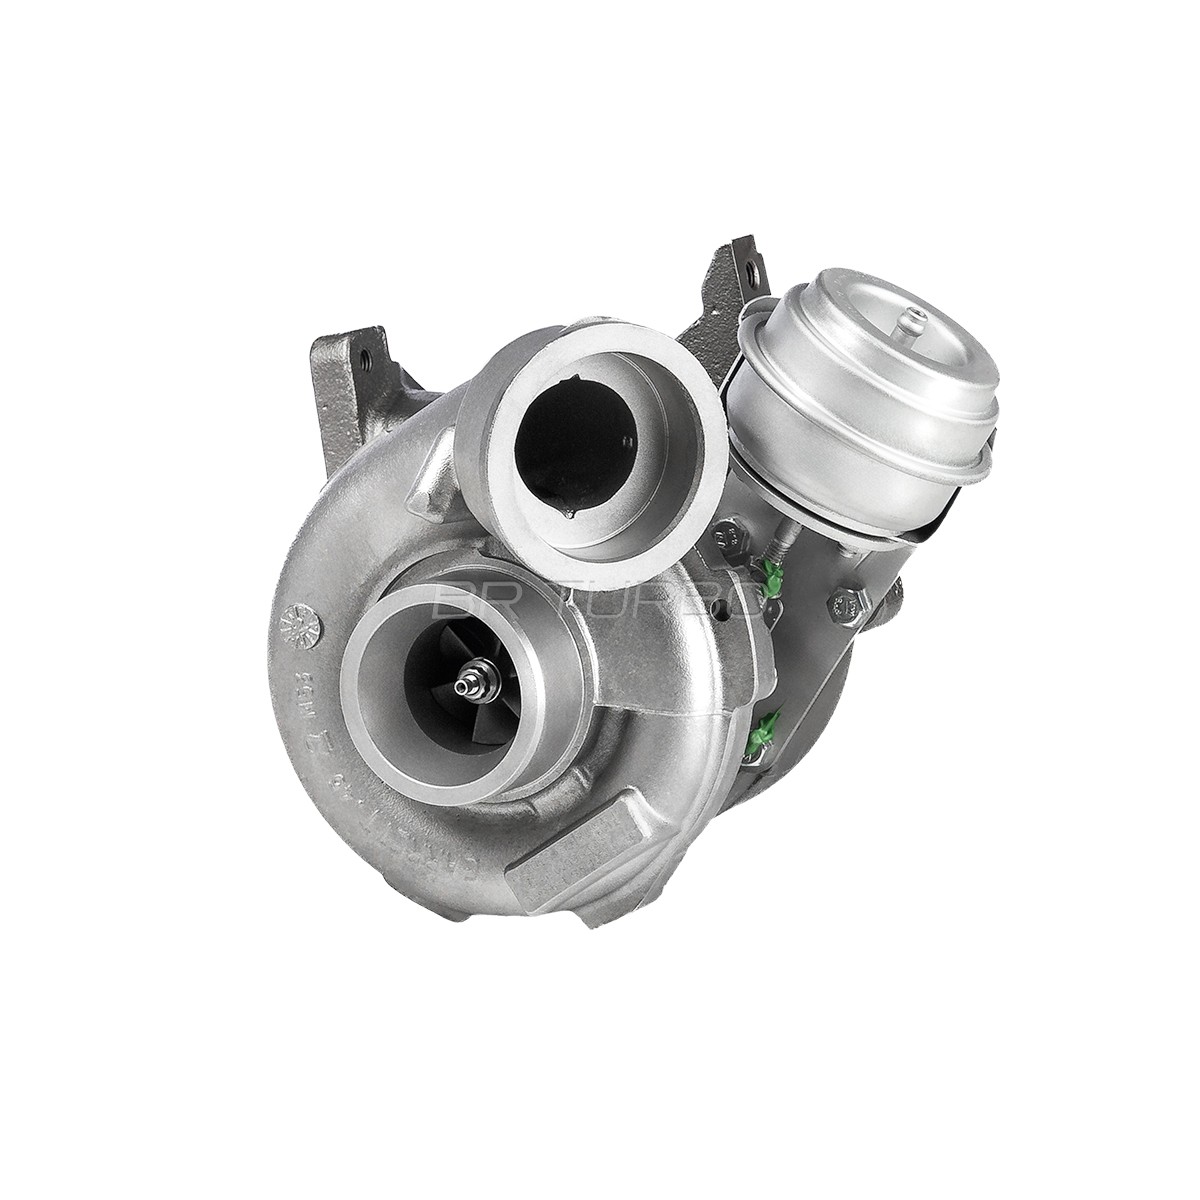 7098365001RS Turbocharger REMANUFACTURED TURBOCHARGER BR Turbo 709836-5001RS review and test